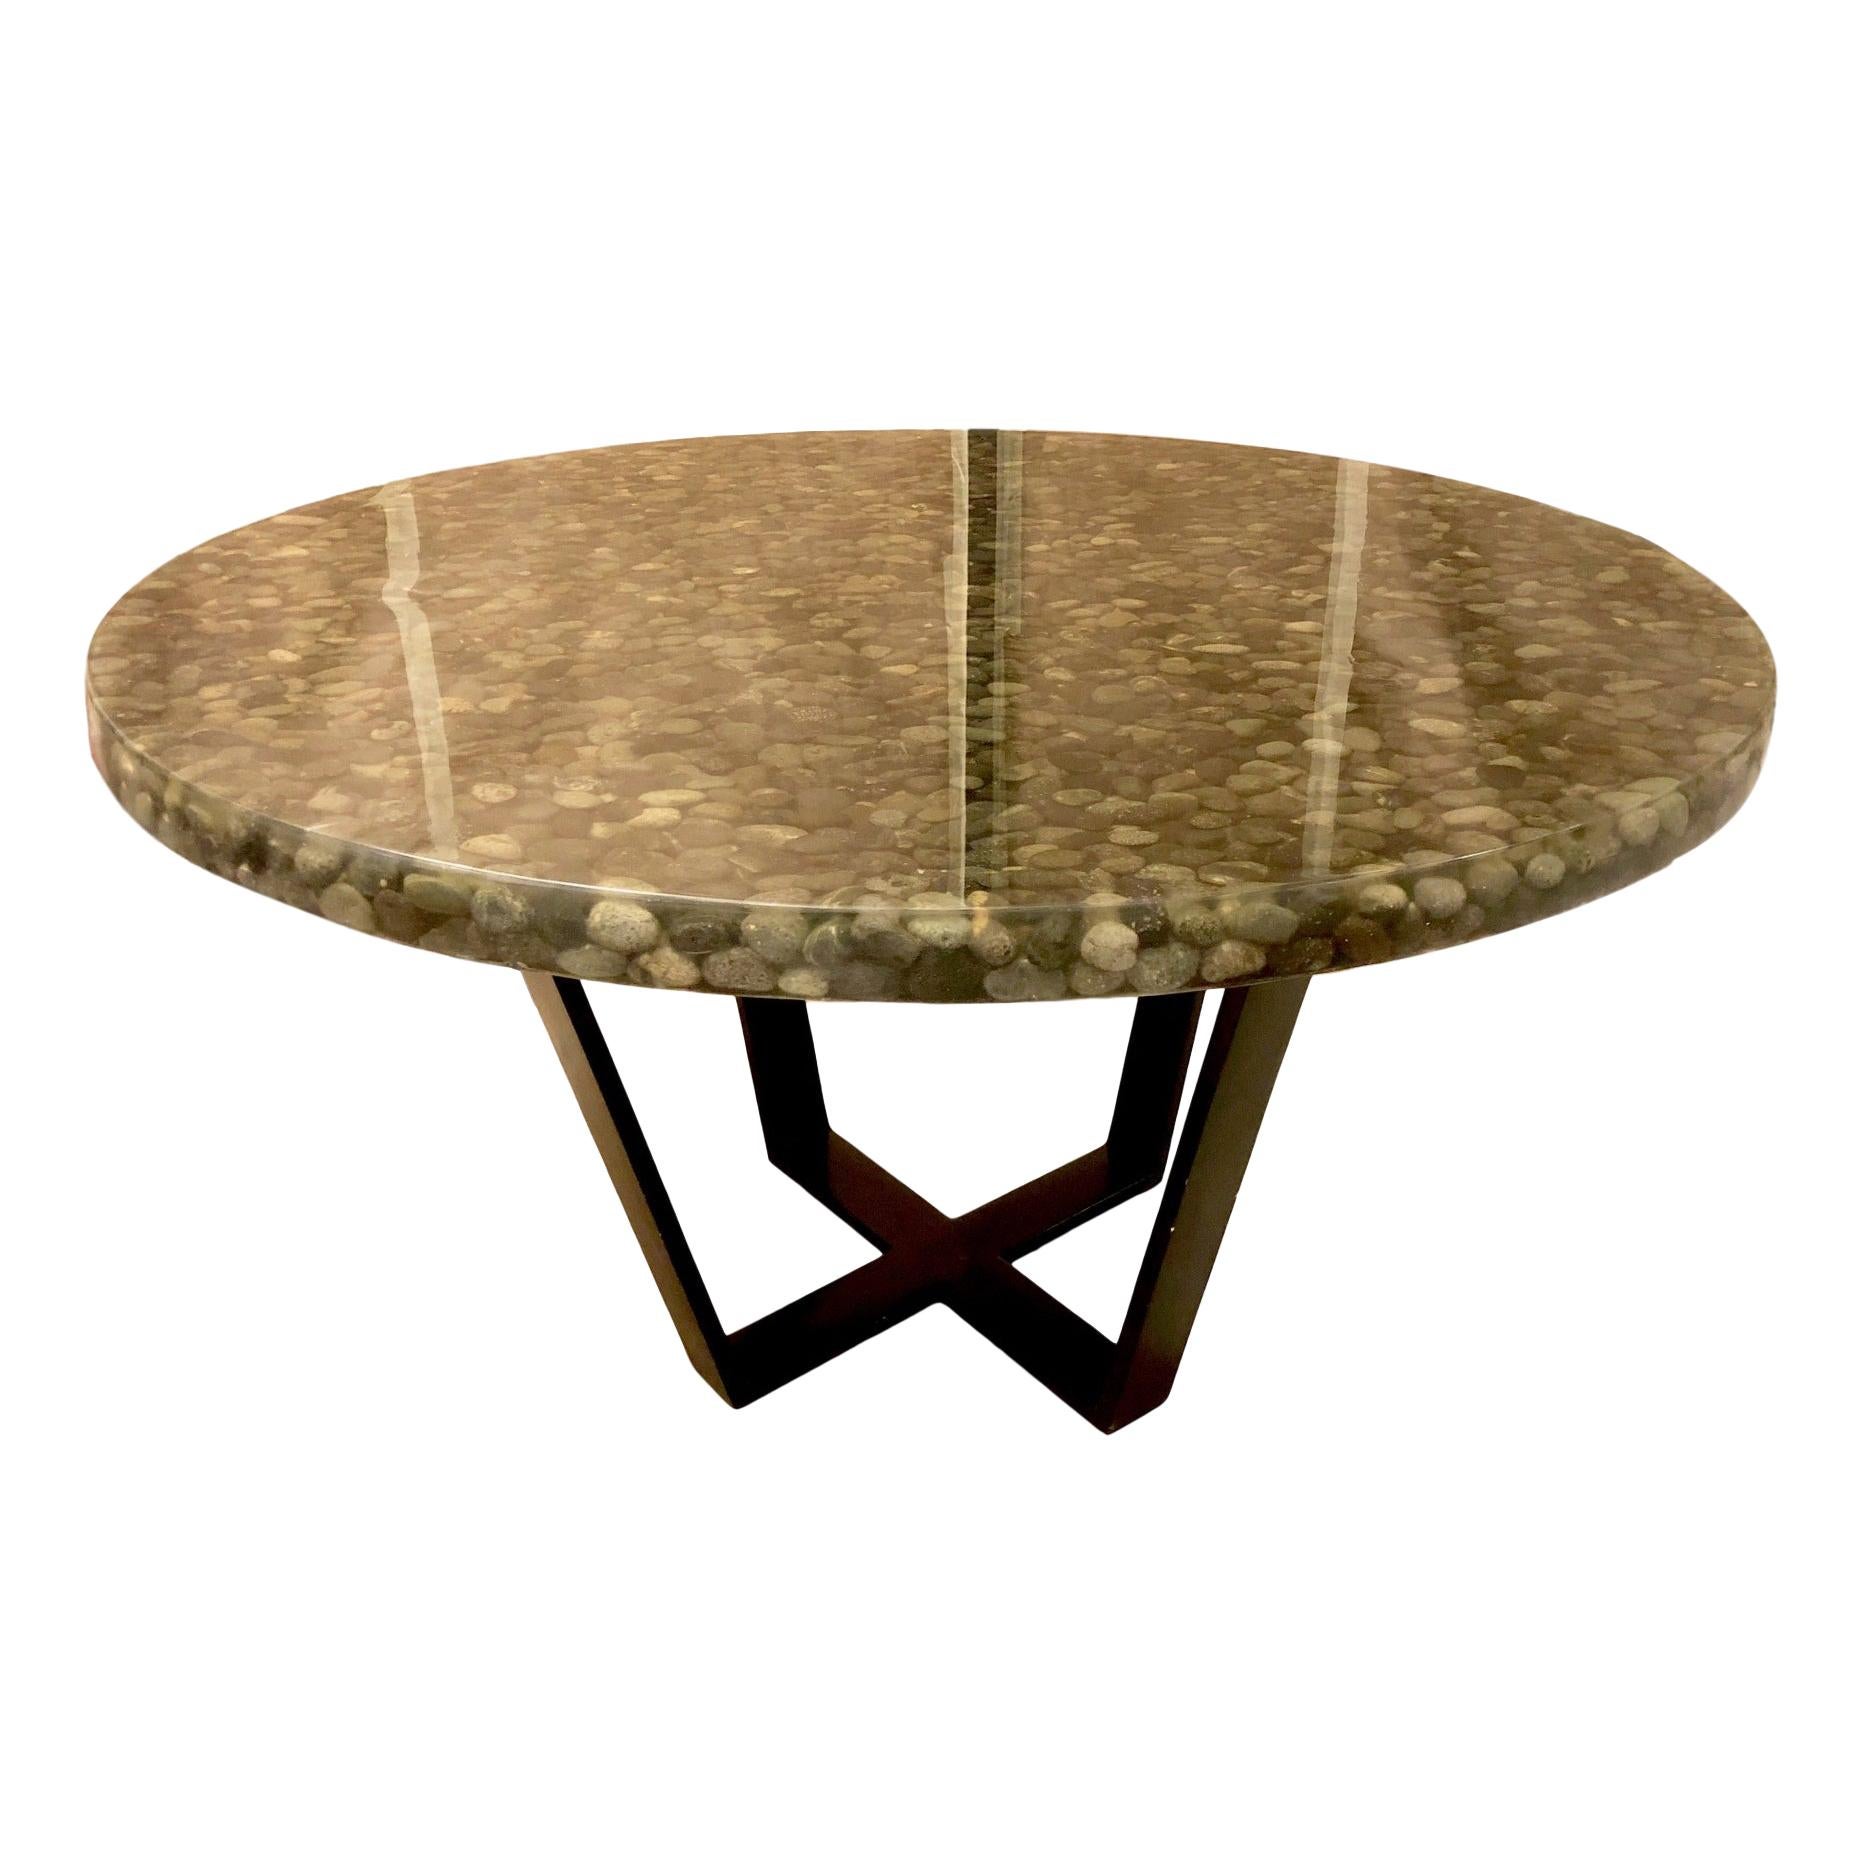 Midcentury Stone and Resin Dining Table